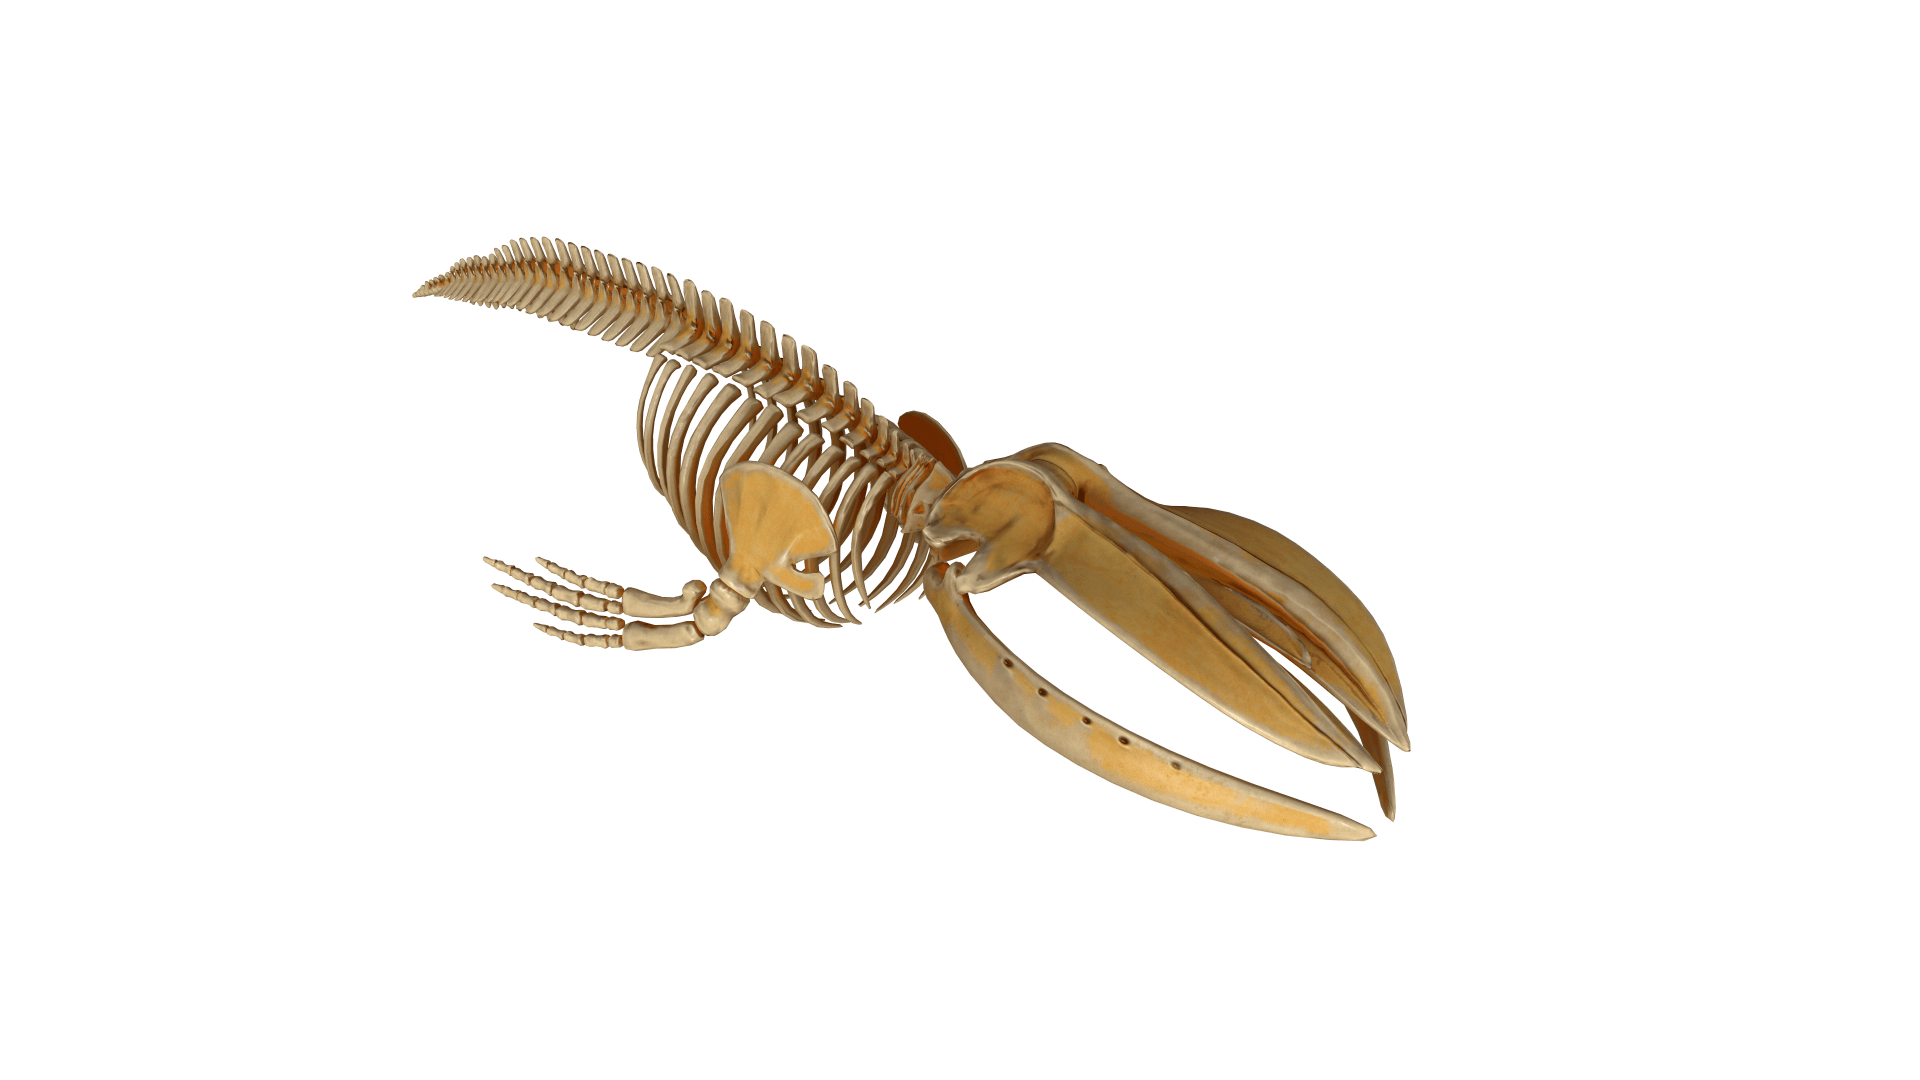 Photo of a humpback whale skeleton